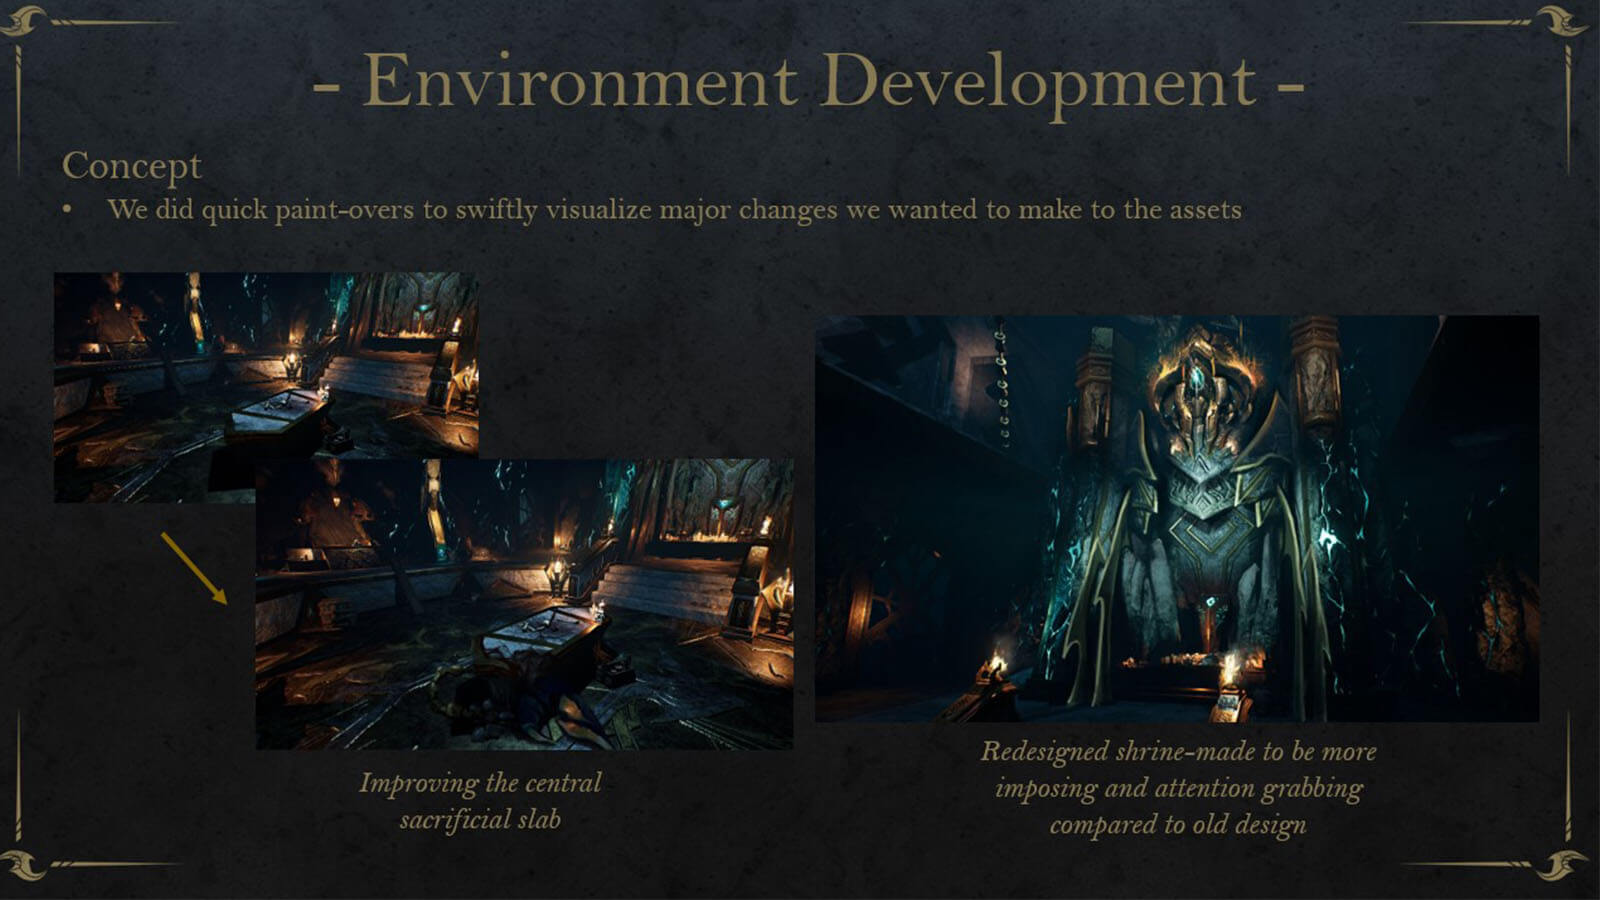 Two screenshots showing the initial and final concepts for of a sacrificial slab and shrine